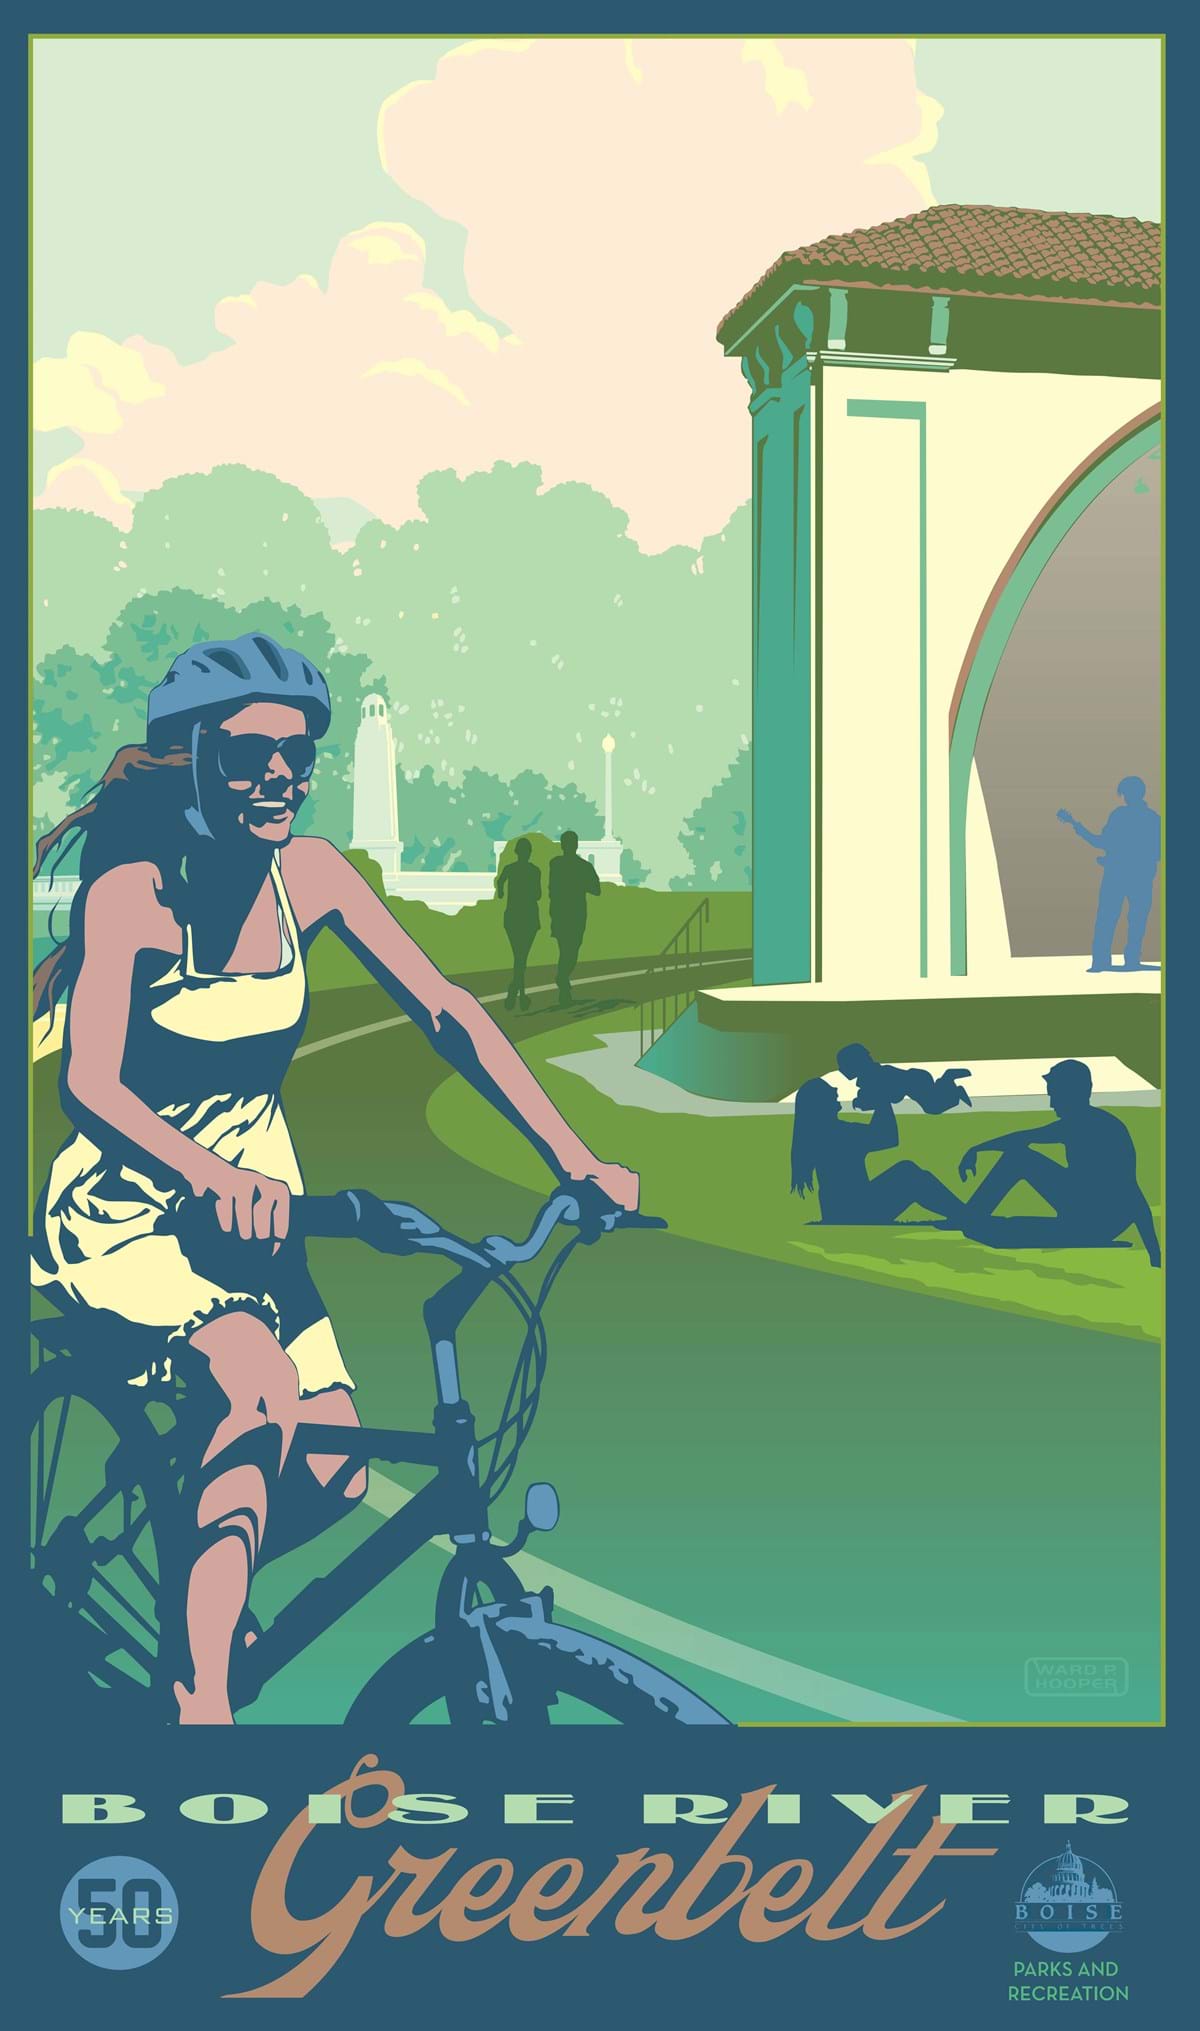 Poster print of woman riding bike, people running in background, family playing, text on bottom reads "Boise River Greenbelt 50 years"